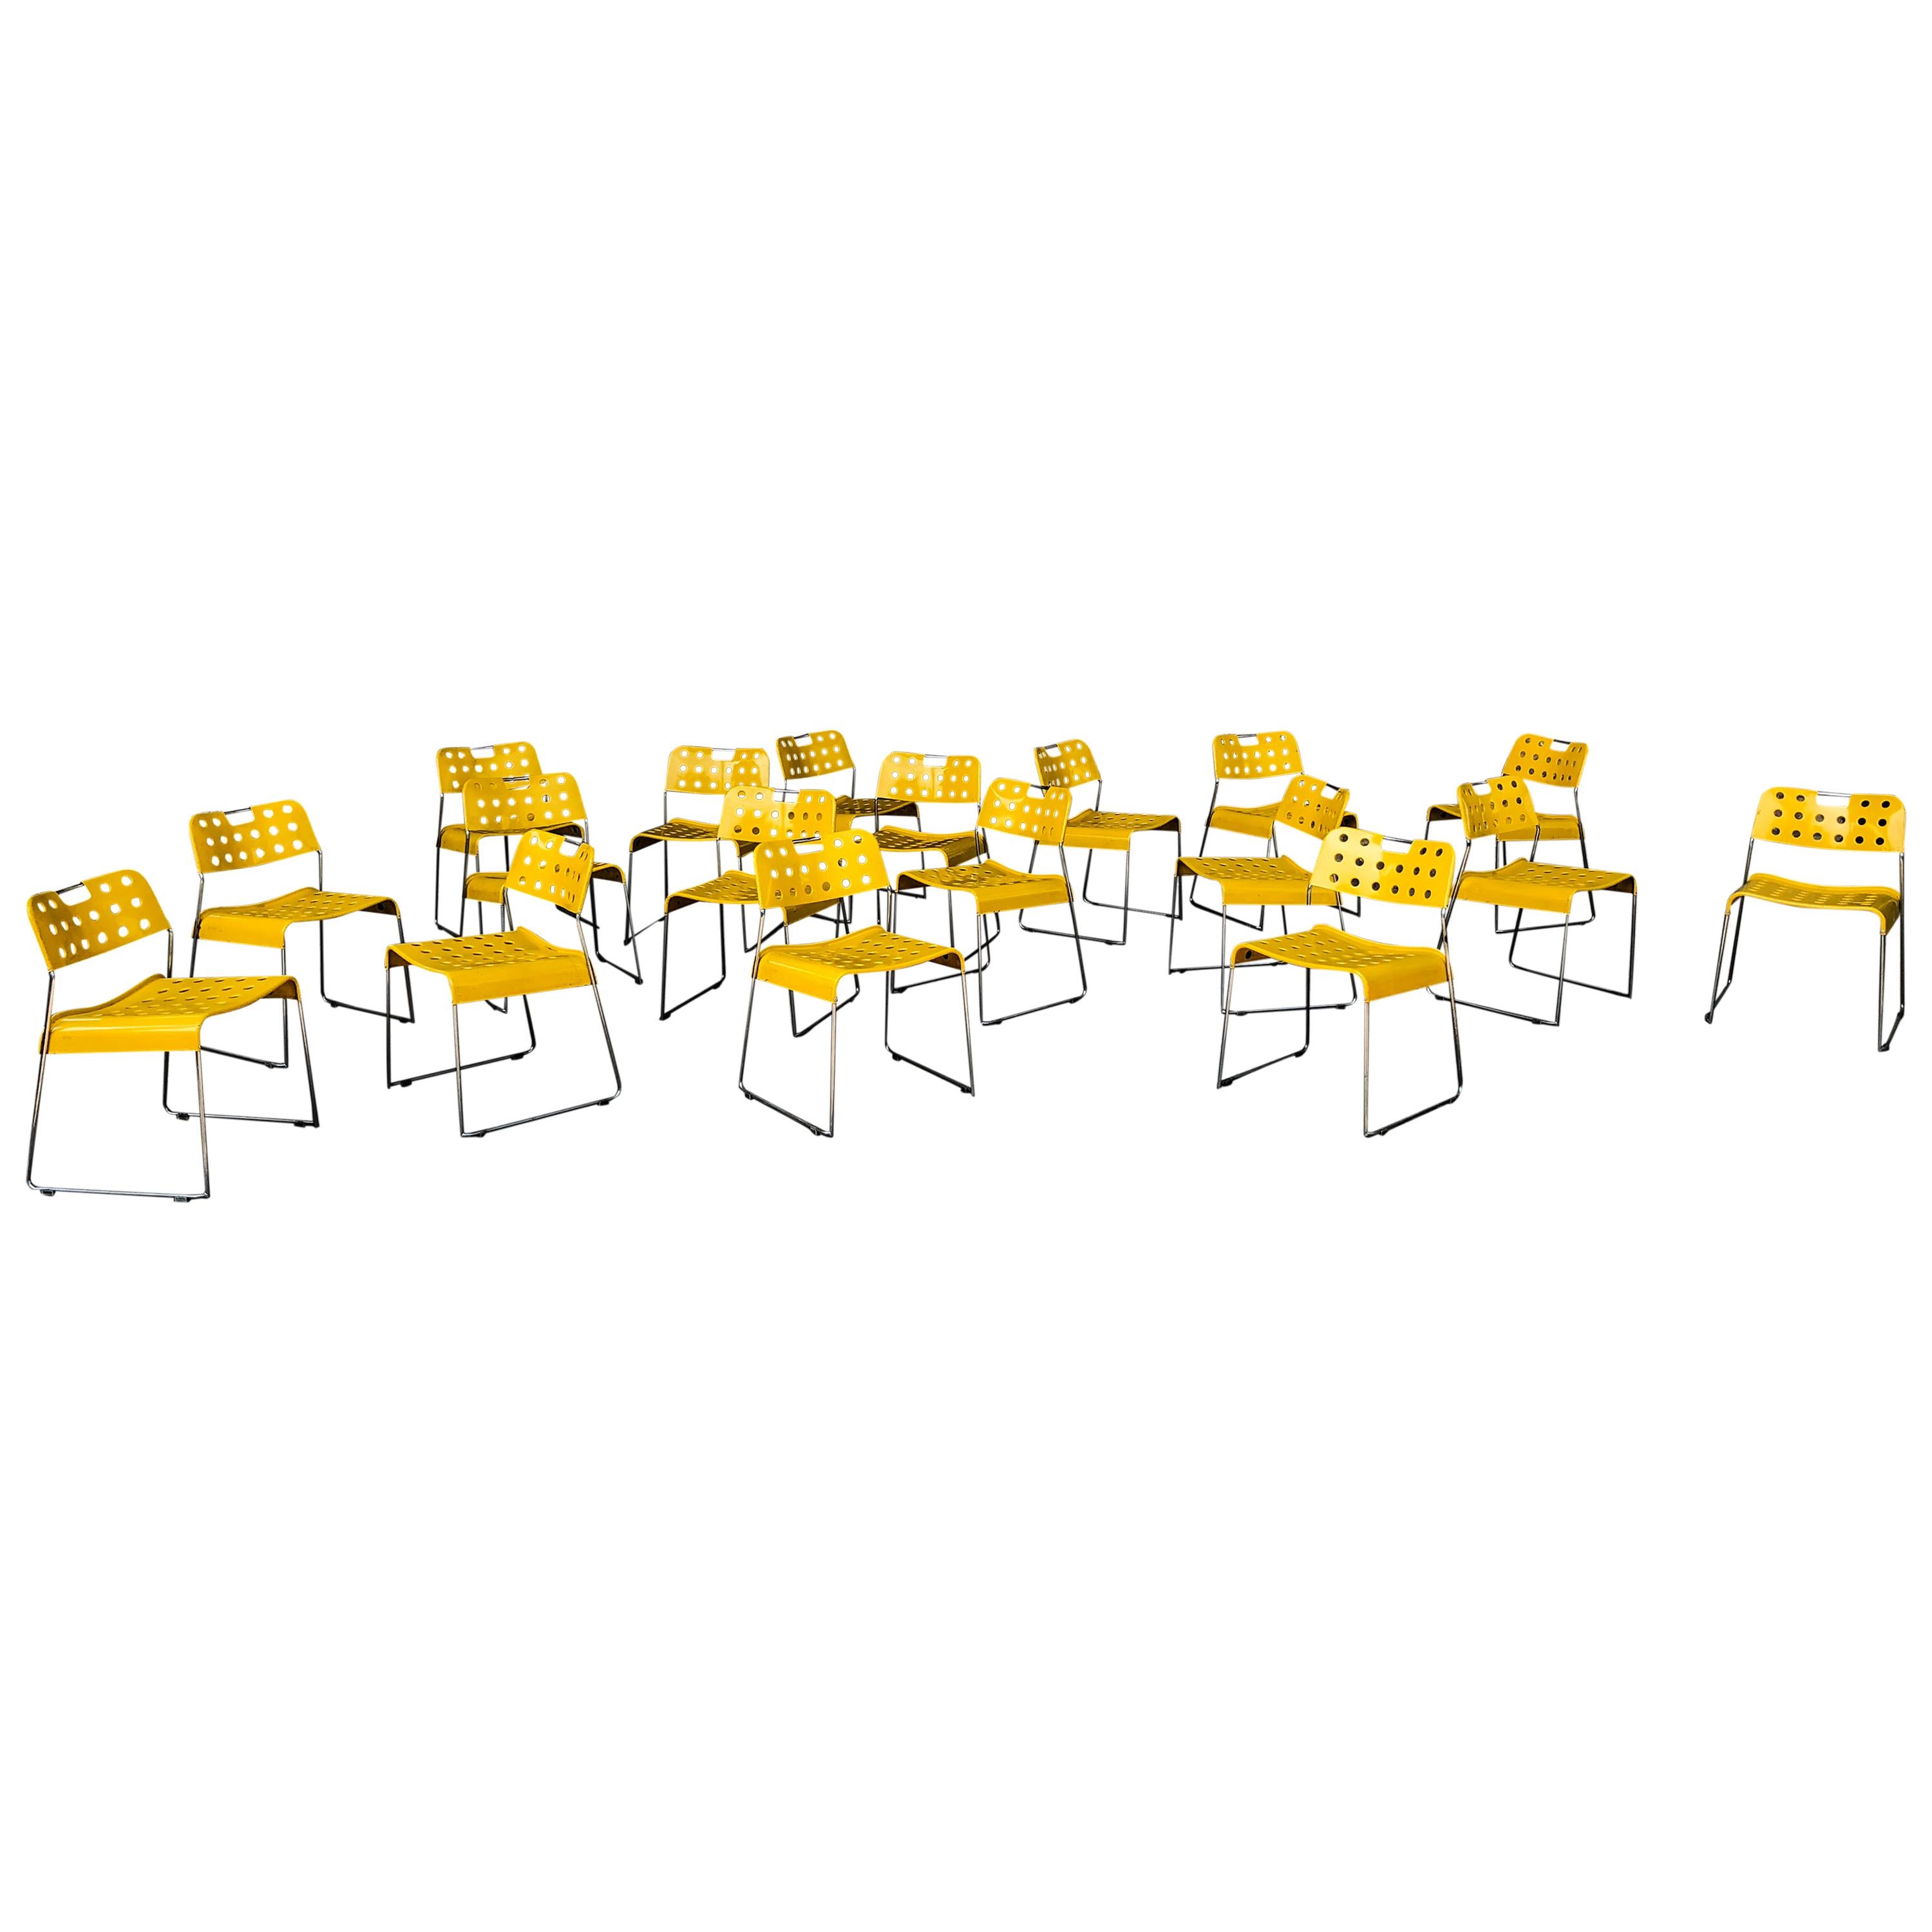 Rodney Kinsman Space Age Yellow Omstak Chair for Bieffeplast, 1971, Set of 4 For Sale 4